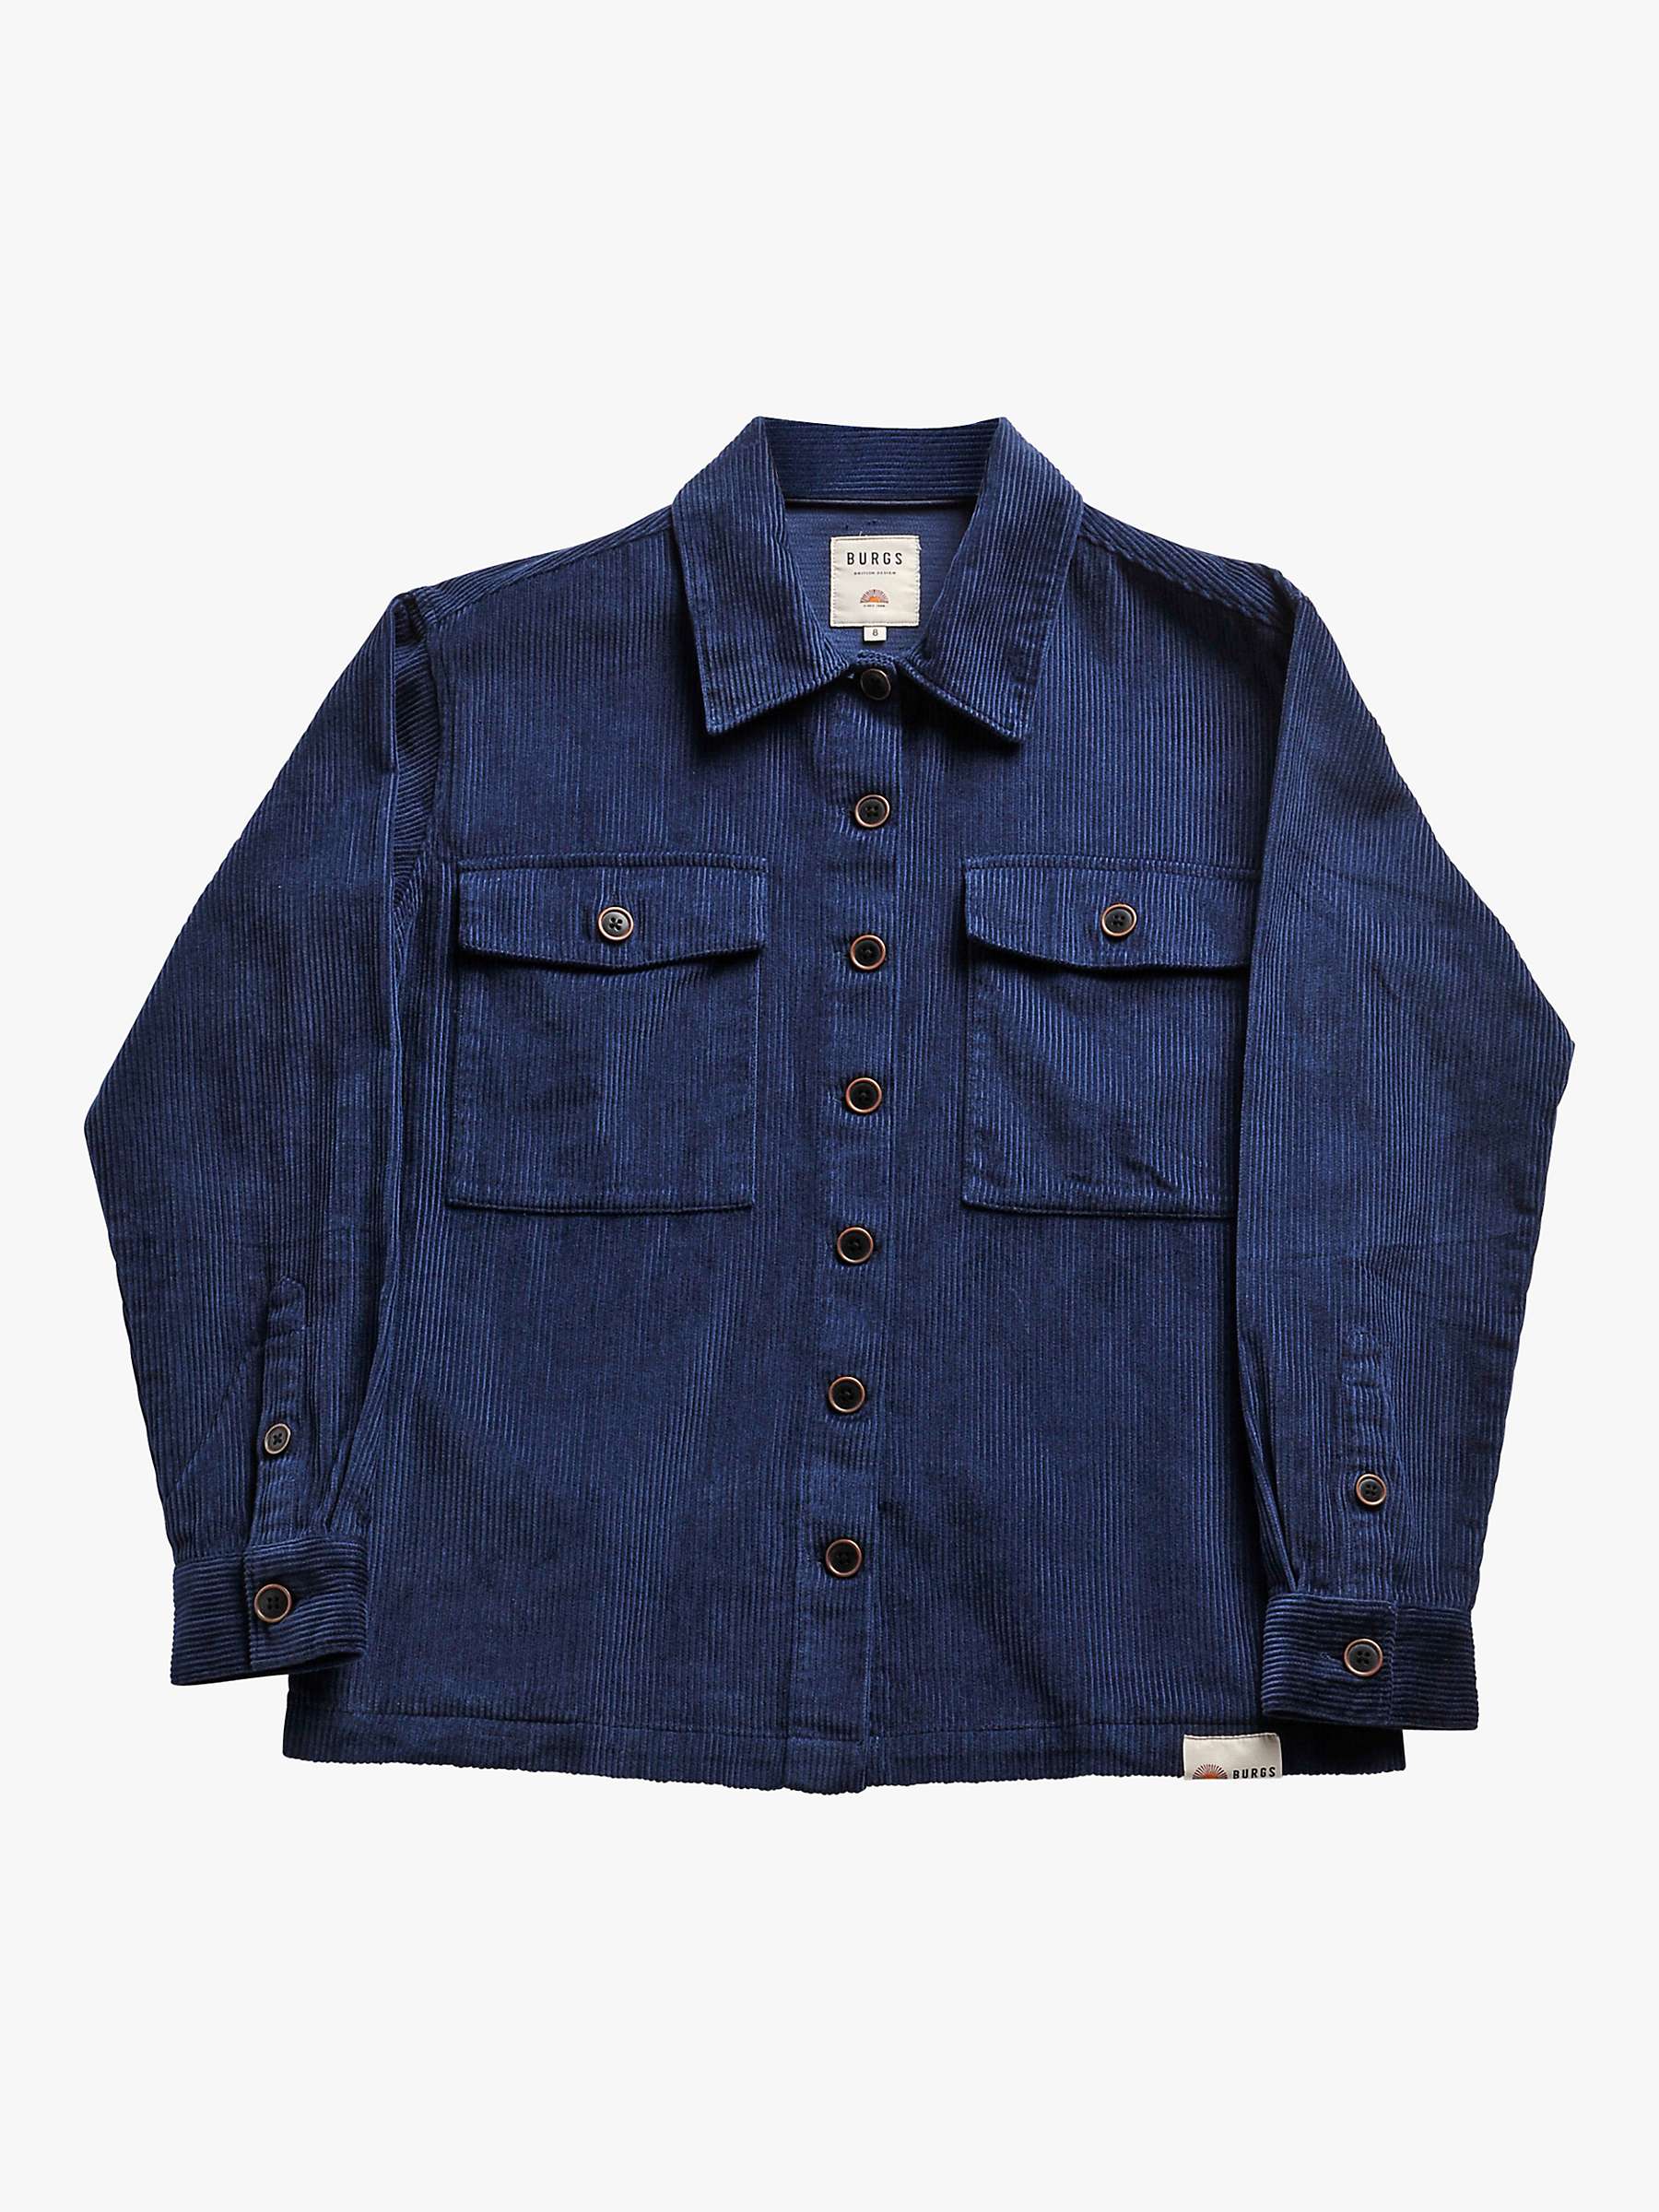 Buy Burgs Budleigh Overshirt Cotton Corduroy Jacket Online at johnlewis.com